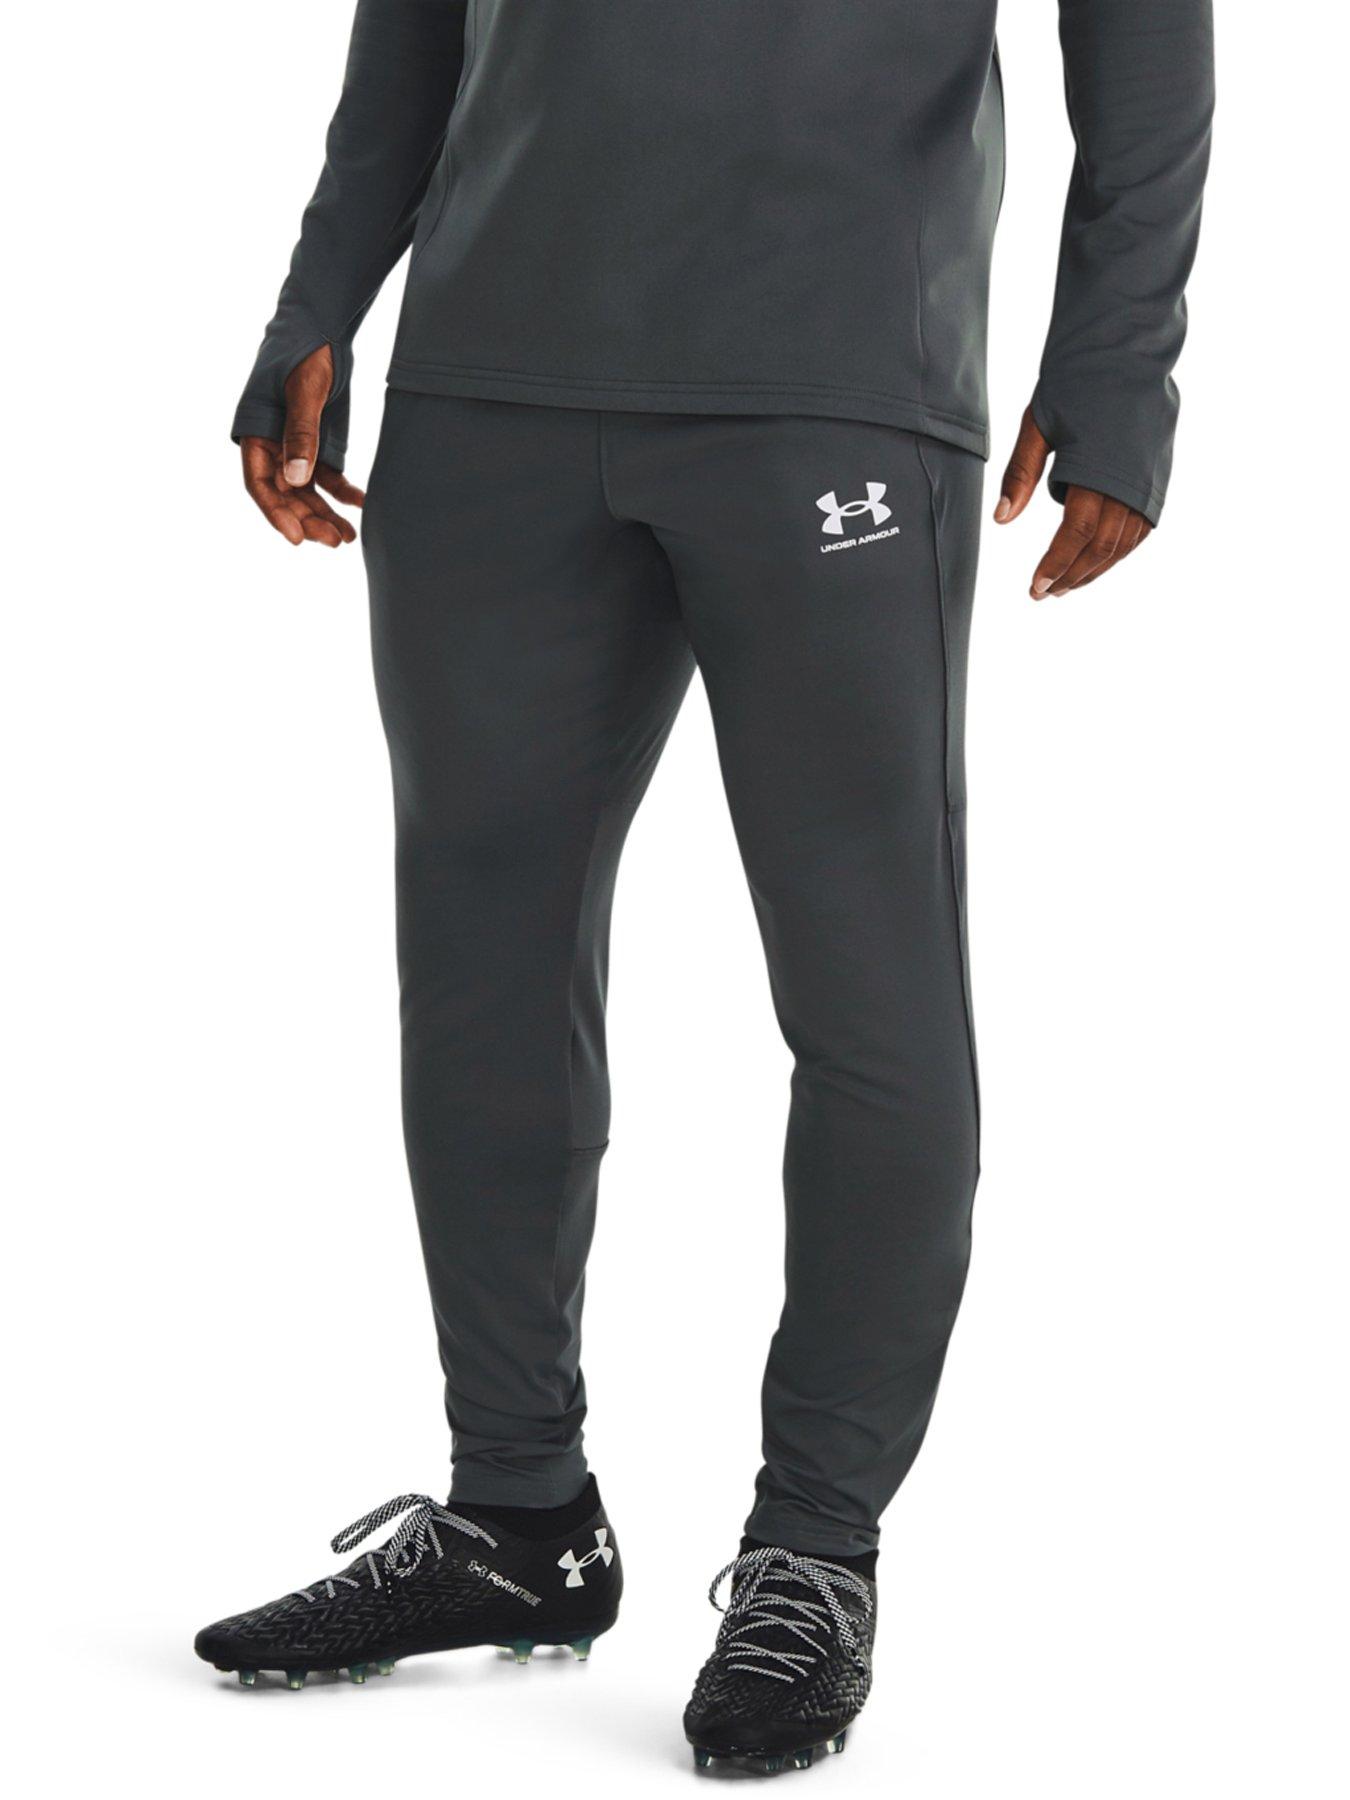 Under Armour, Pants & Jumpsuits, Brand New Under Armor Leggings No Tags  But Never Worn Or Laundered